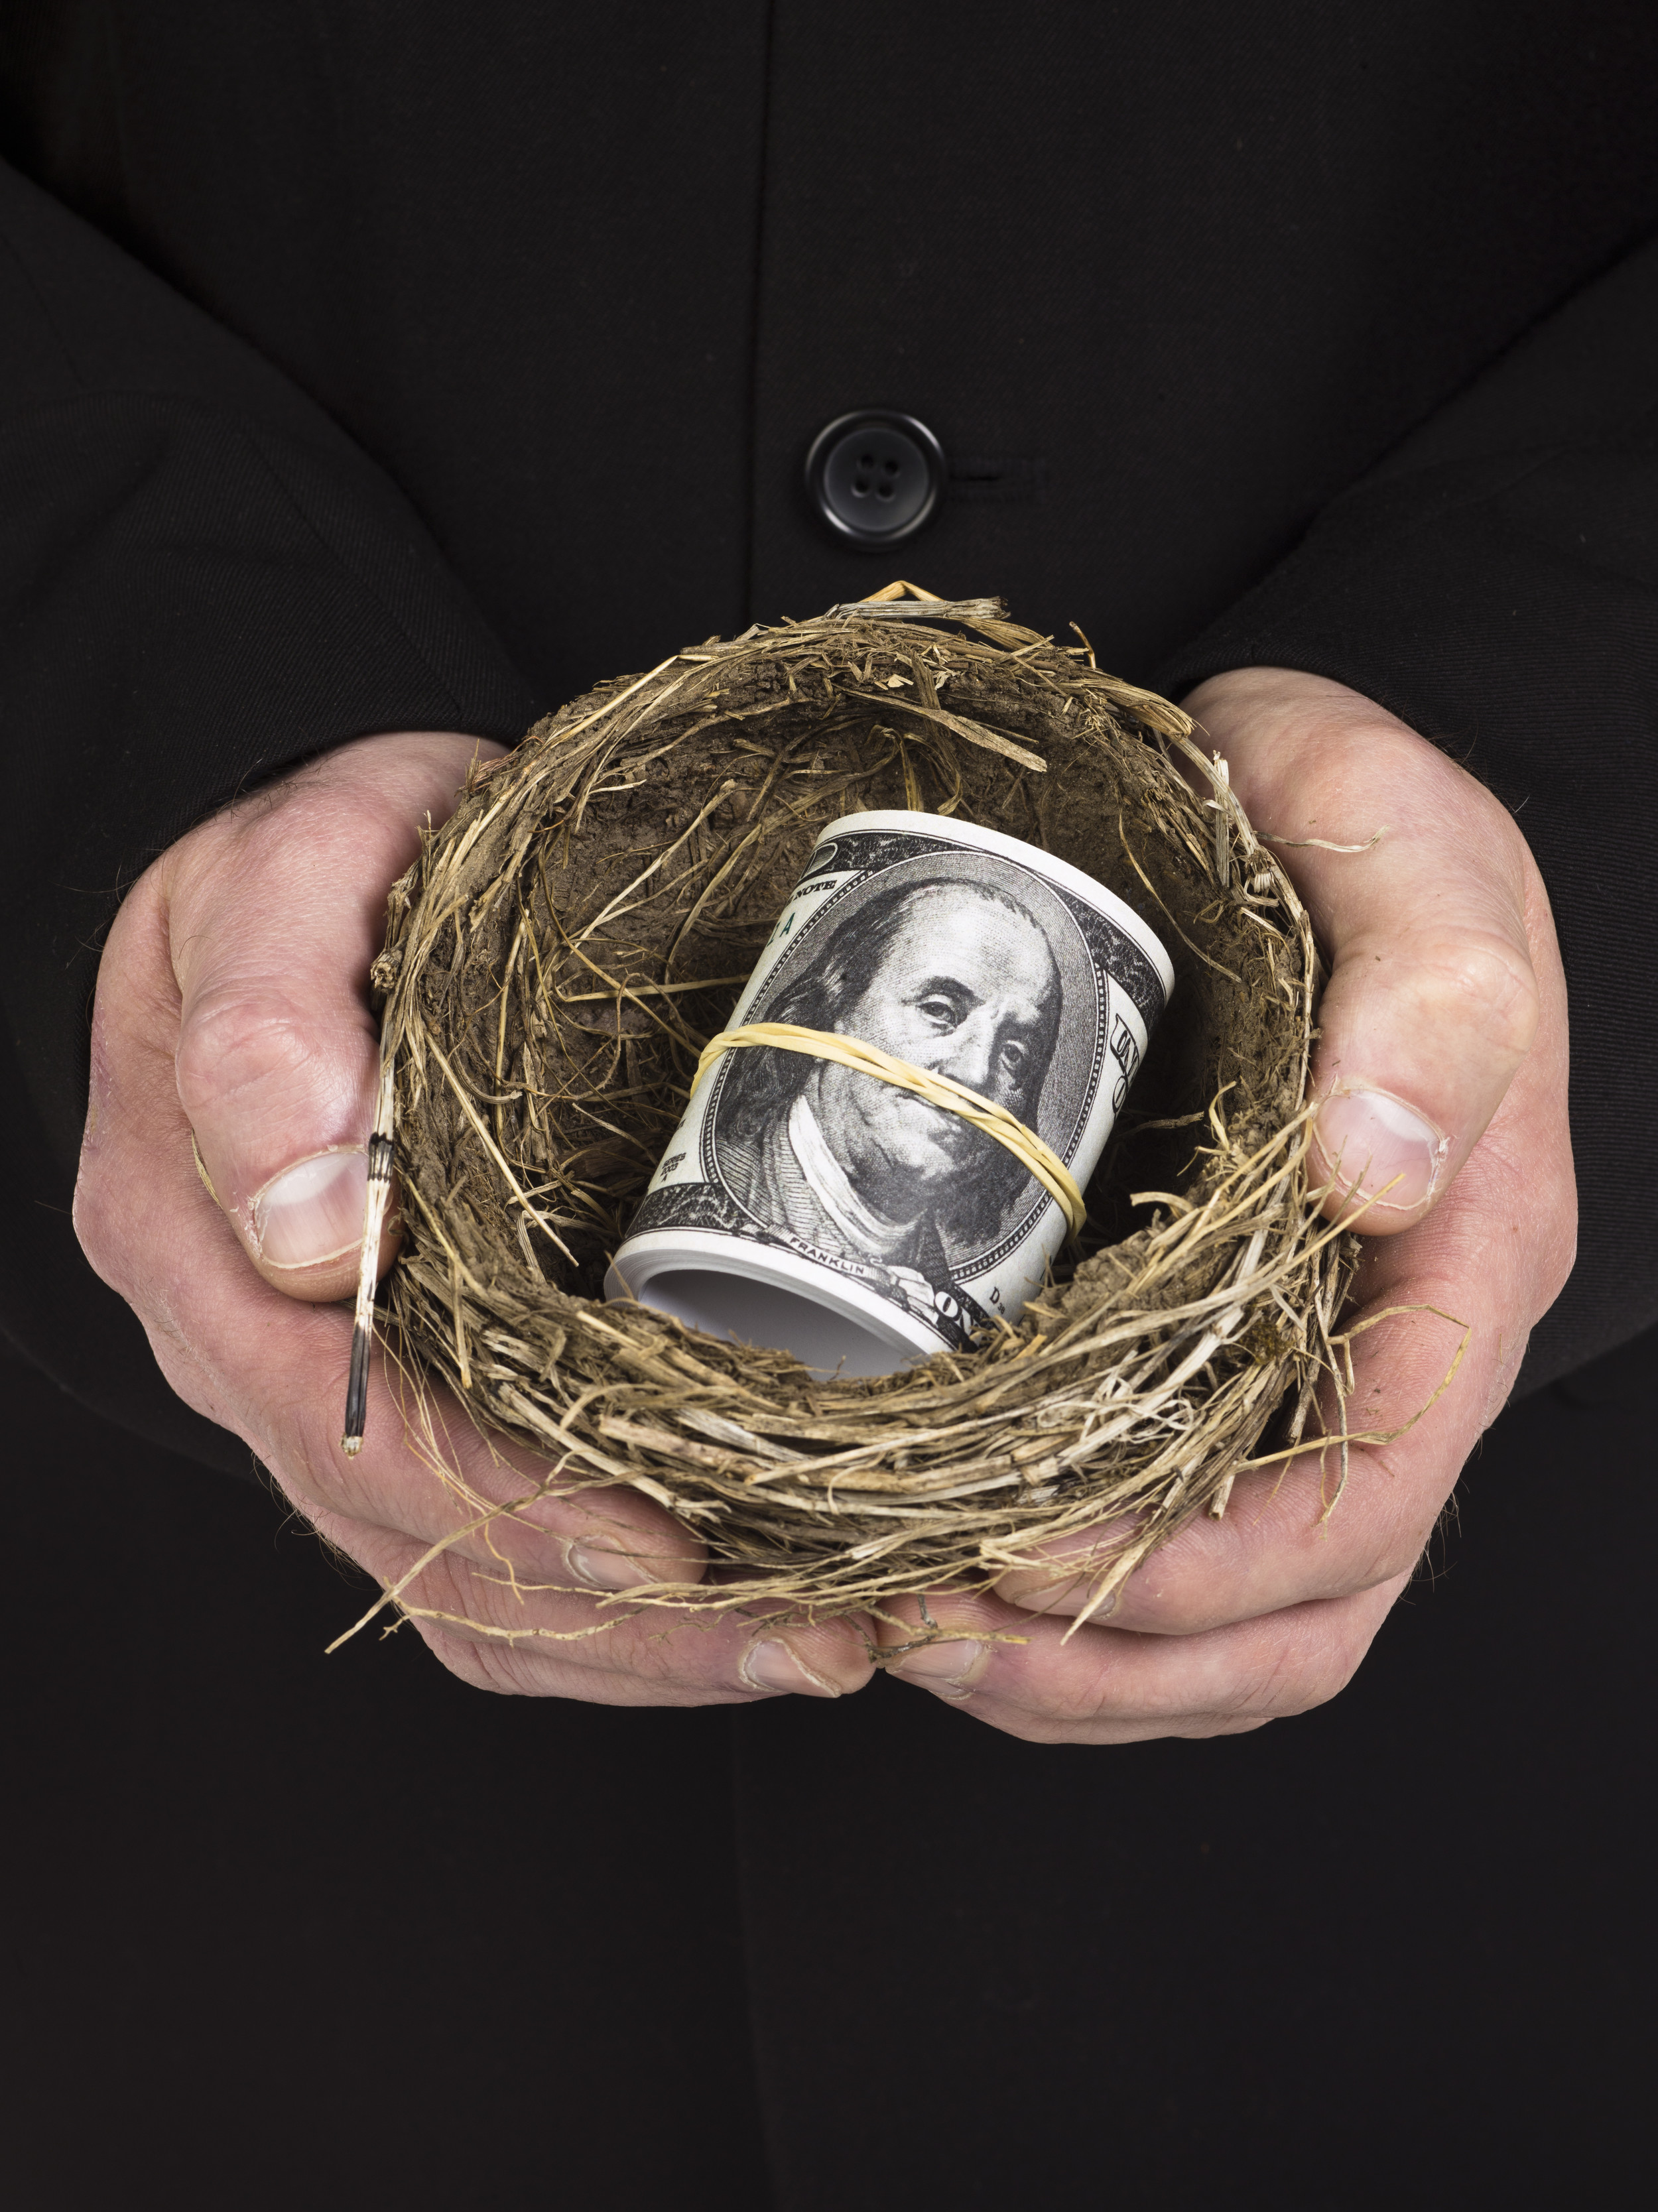 Should You Jeopardize Your Nest Egg To Repay Your Credit Card Debt